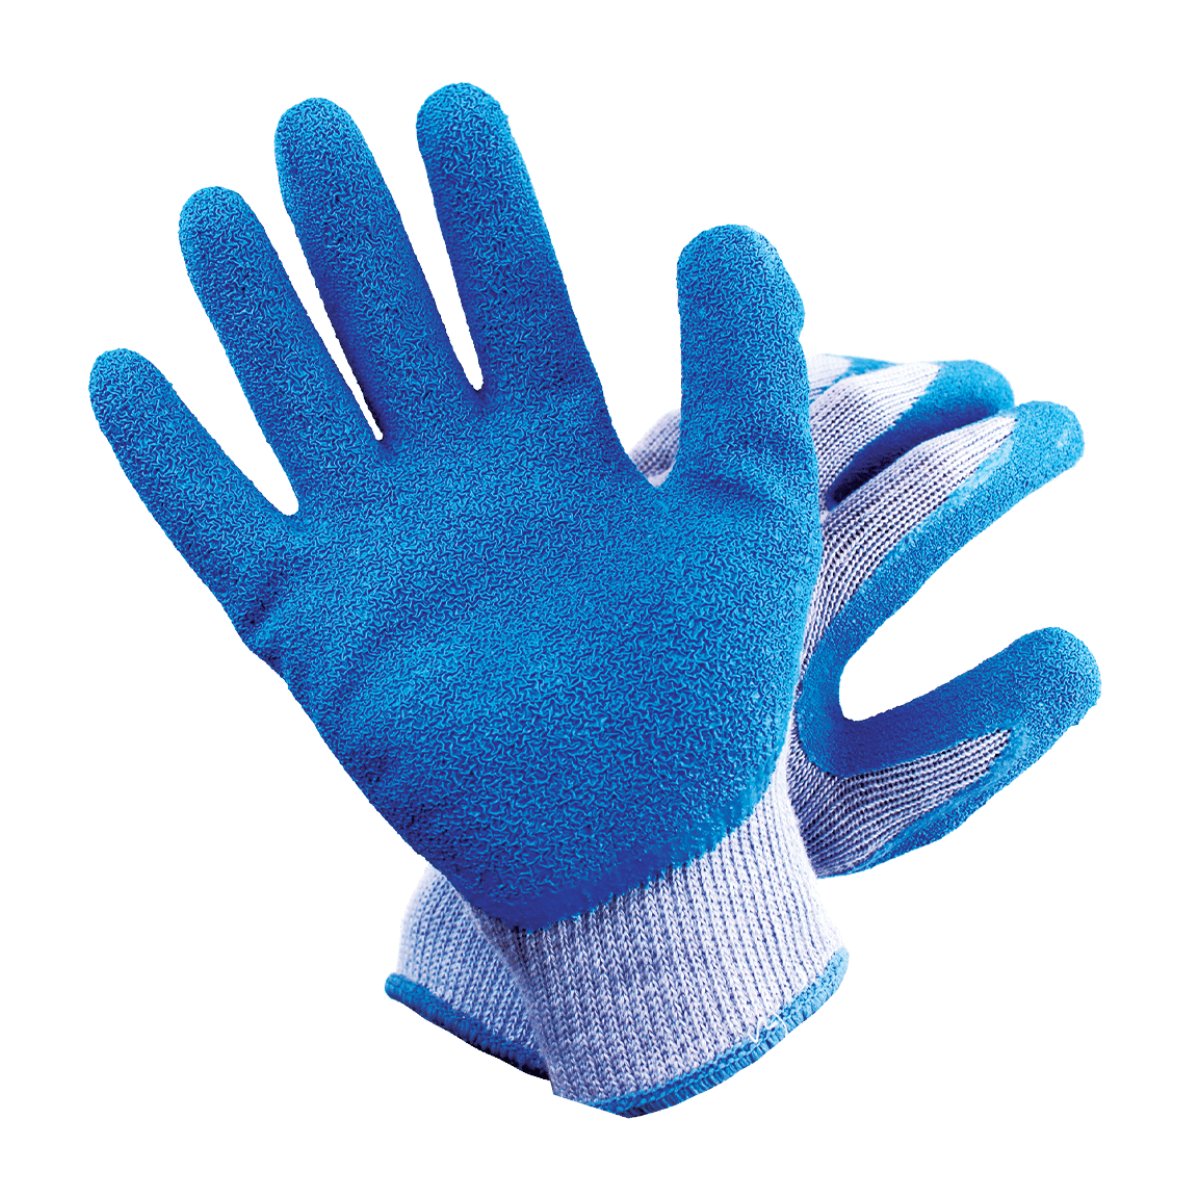 TGC BlueHeat® Heat Resistant Gloves 71040 (Pack of 12)